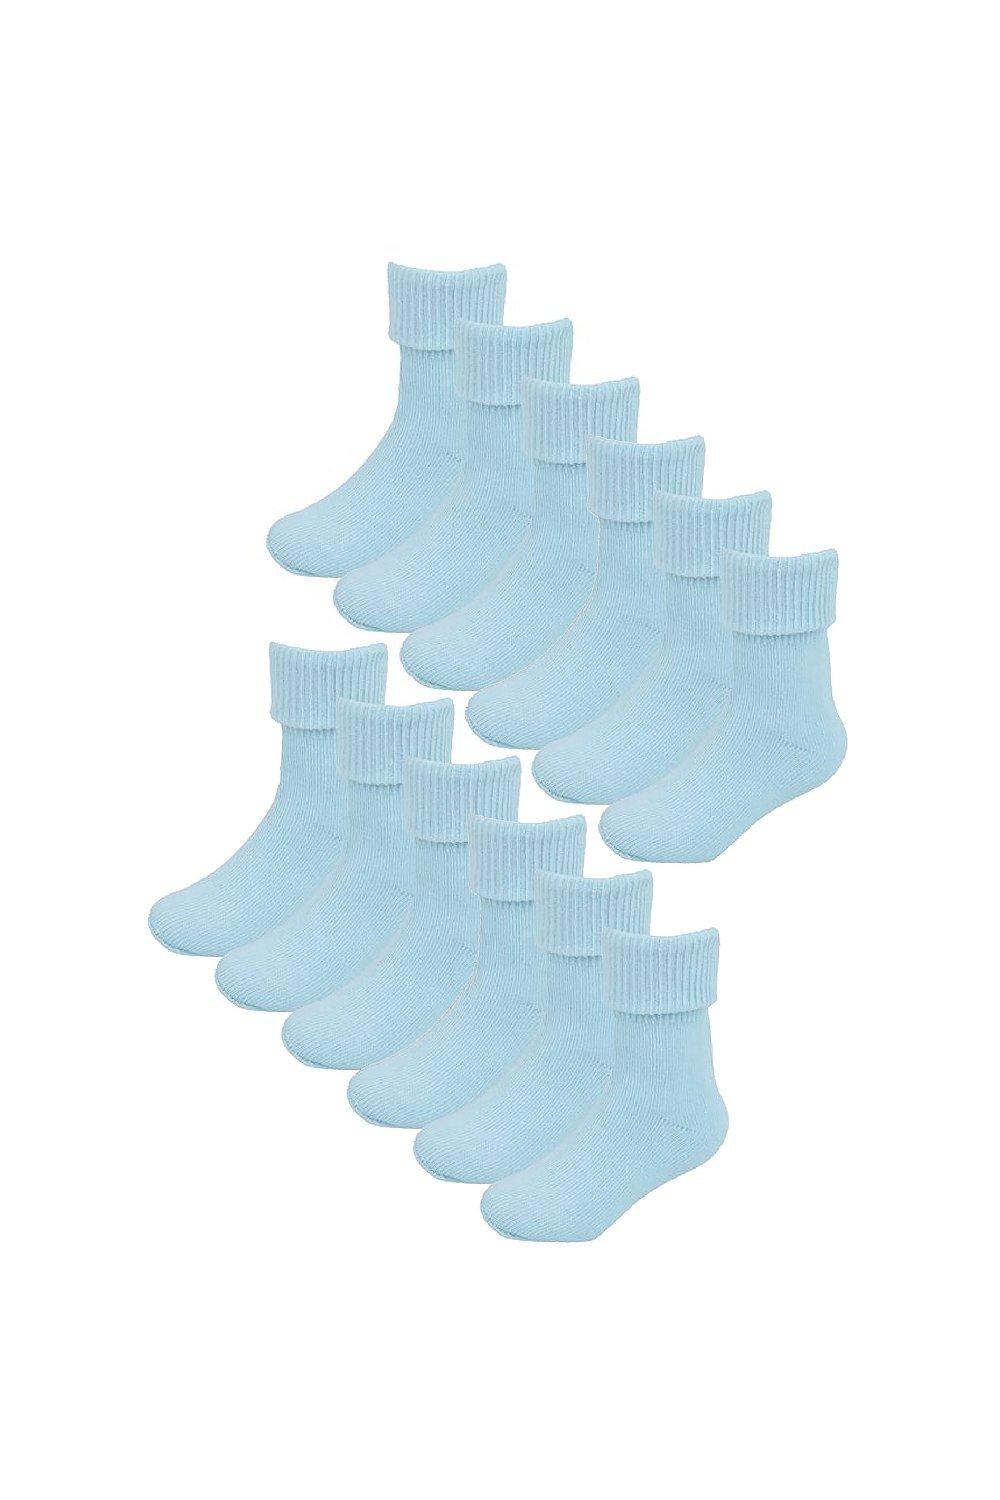 6 Pairs Plain Turn Over Top Soft Cotton Socks for Babies